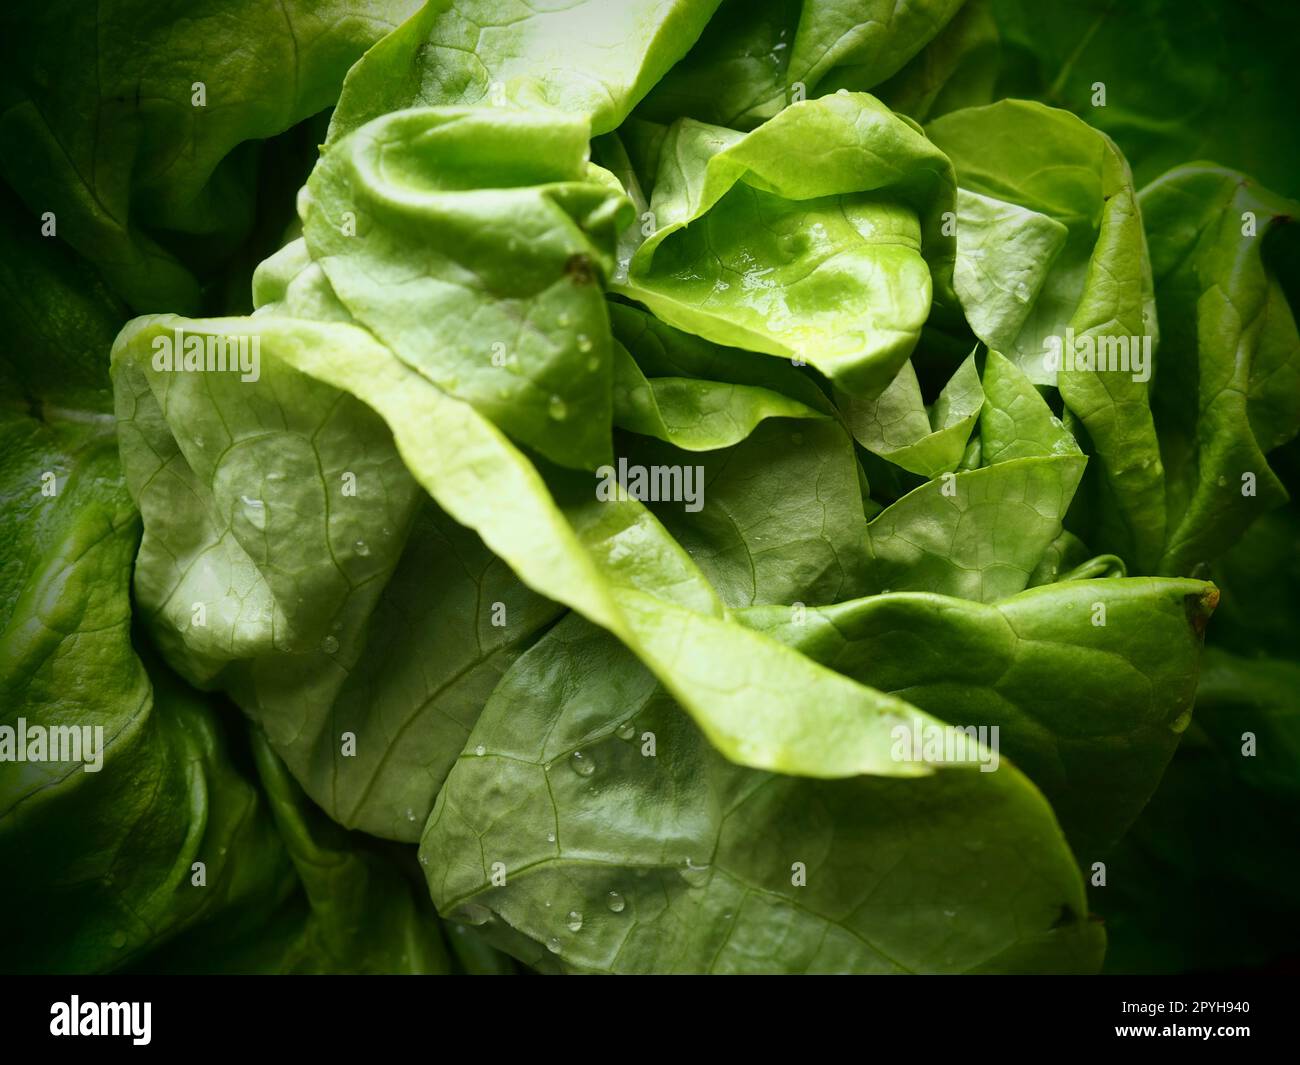 lettuce. An annual herb of the genus Lettuce of the Asteraceae family. Delicious fortified leaves. Green salad or side dish. Fresh herbs for healthy eating Stock Photo